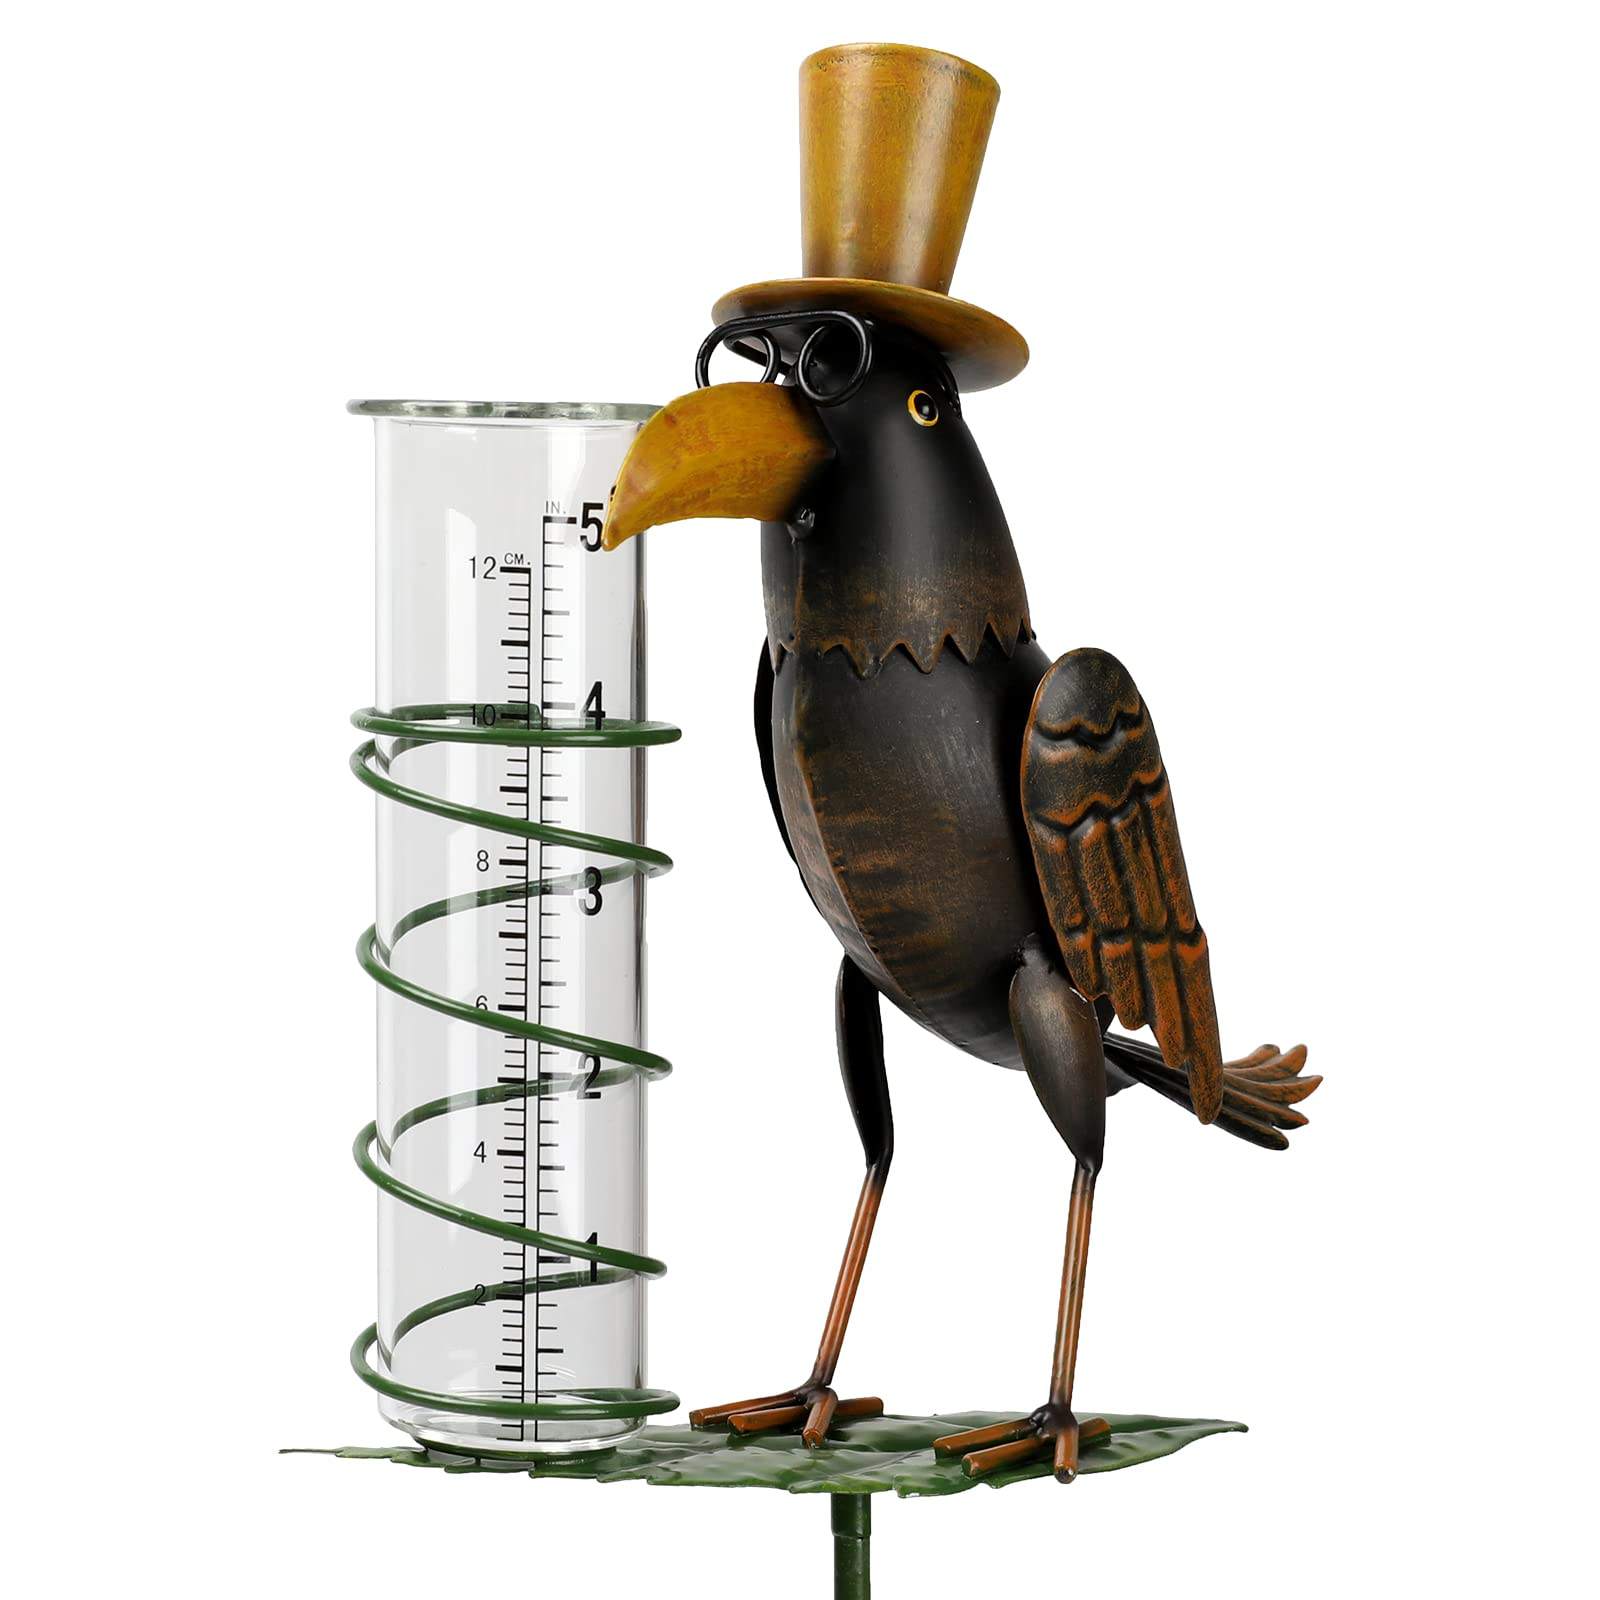 Outdoor Metal Crow Figurine Rain Gauge Stake With Plastic Tube 9.05" W X 3.54" D X 40" H For Yard Garden Stakes Decor